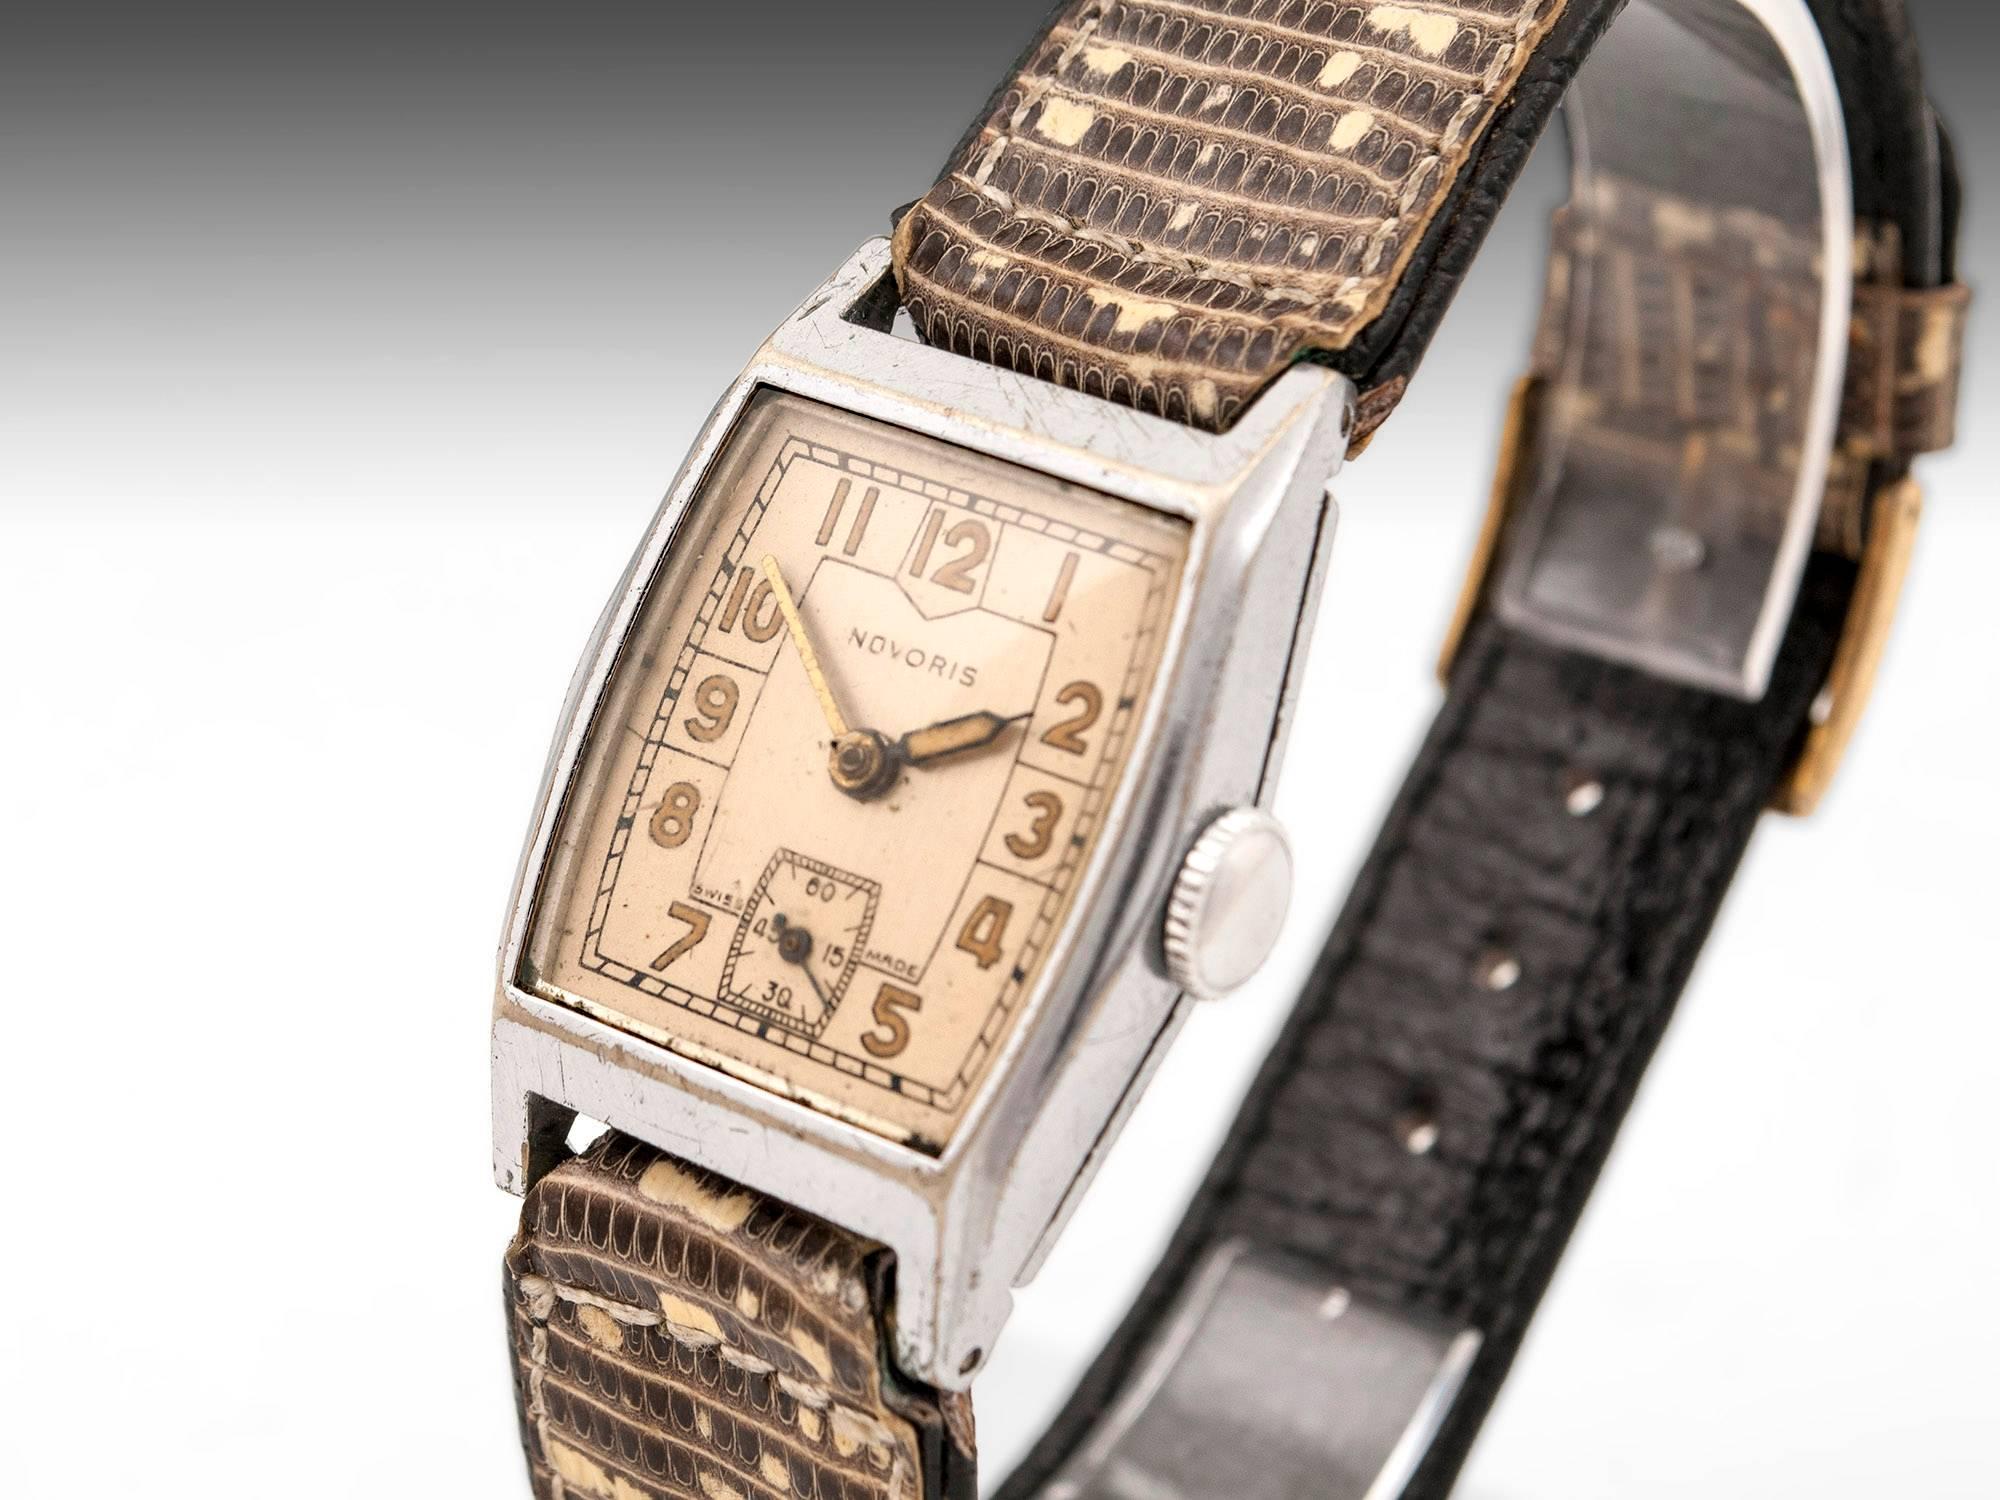 Art Deco Novoris mens wristwatch finished in nickel chrome with four jewel hand-winding movement. Mechanism Serial number 